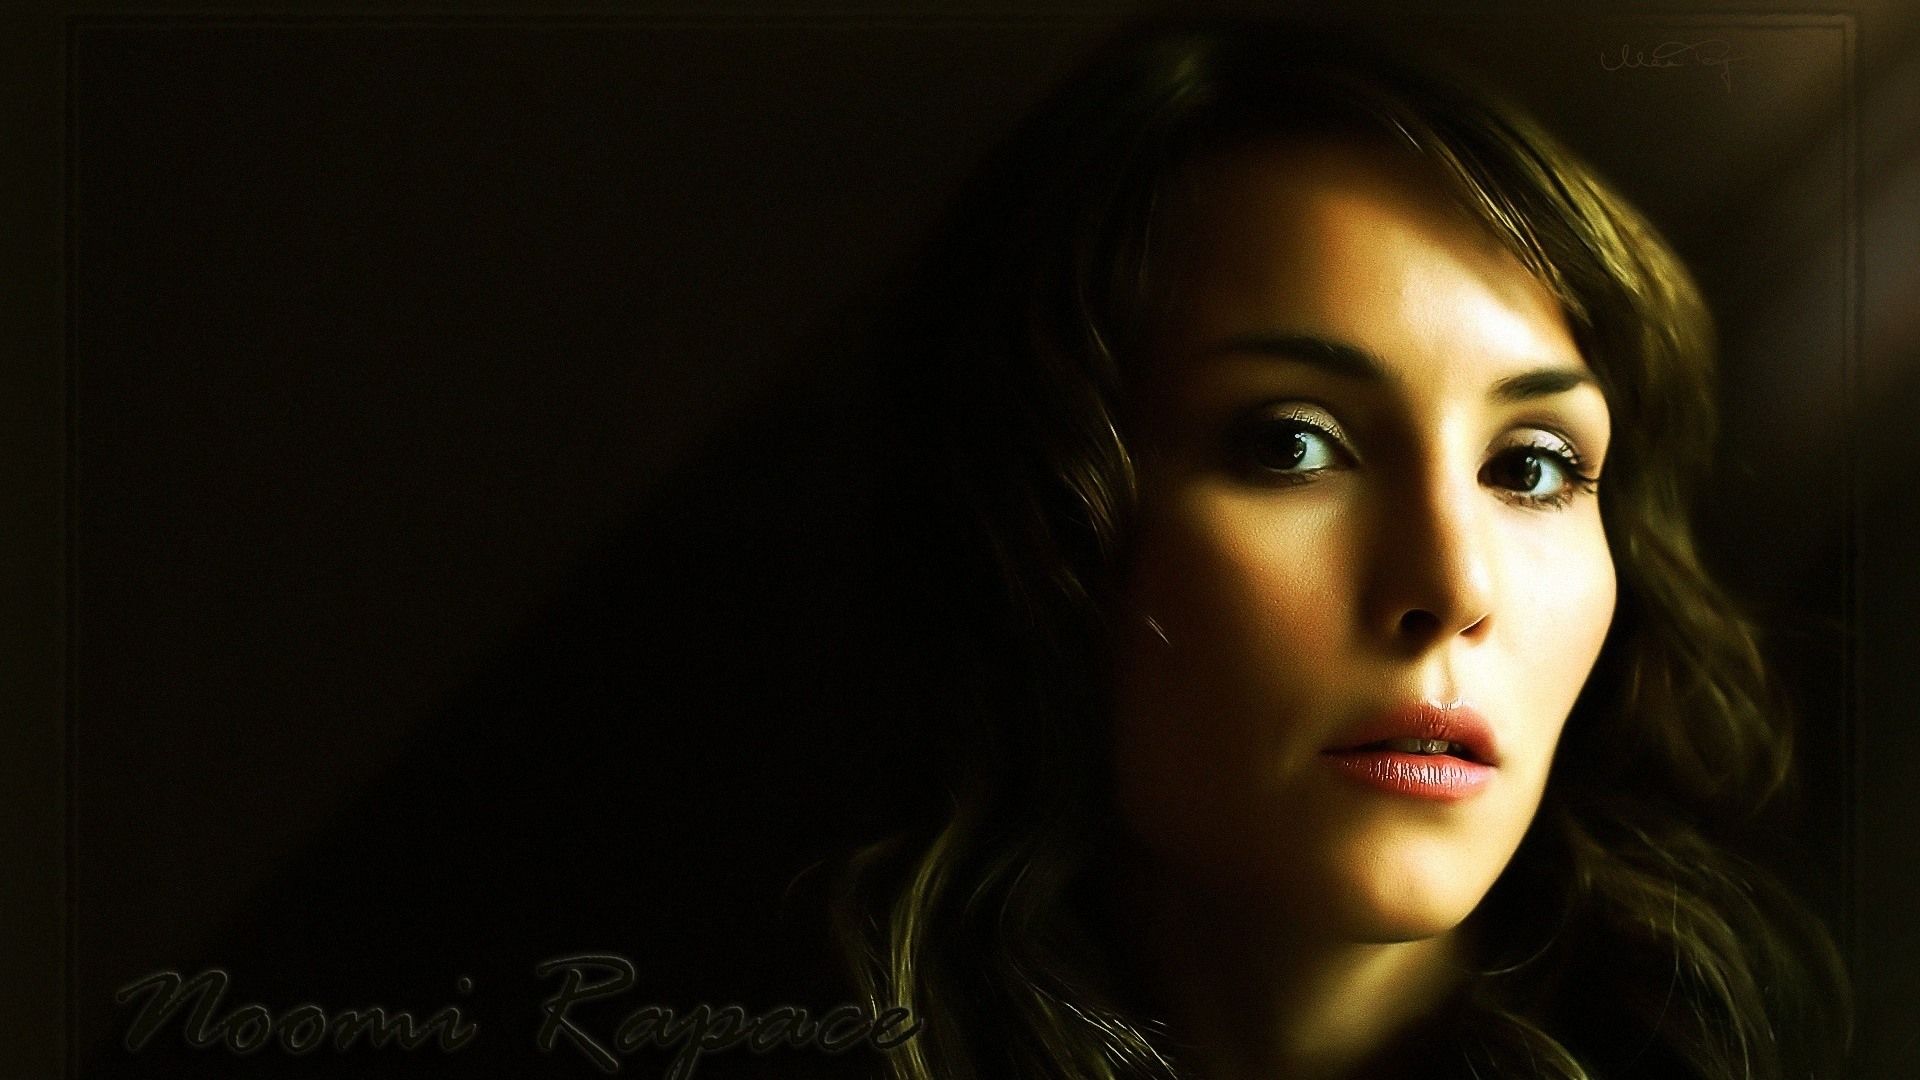 Noomi Rapace Wallpaper Image Photo Picture Background